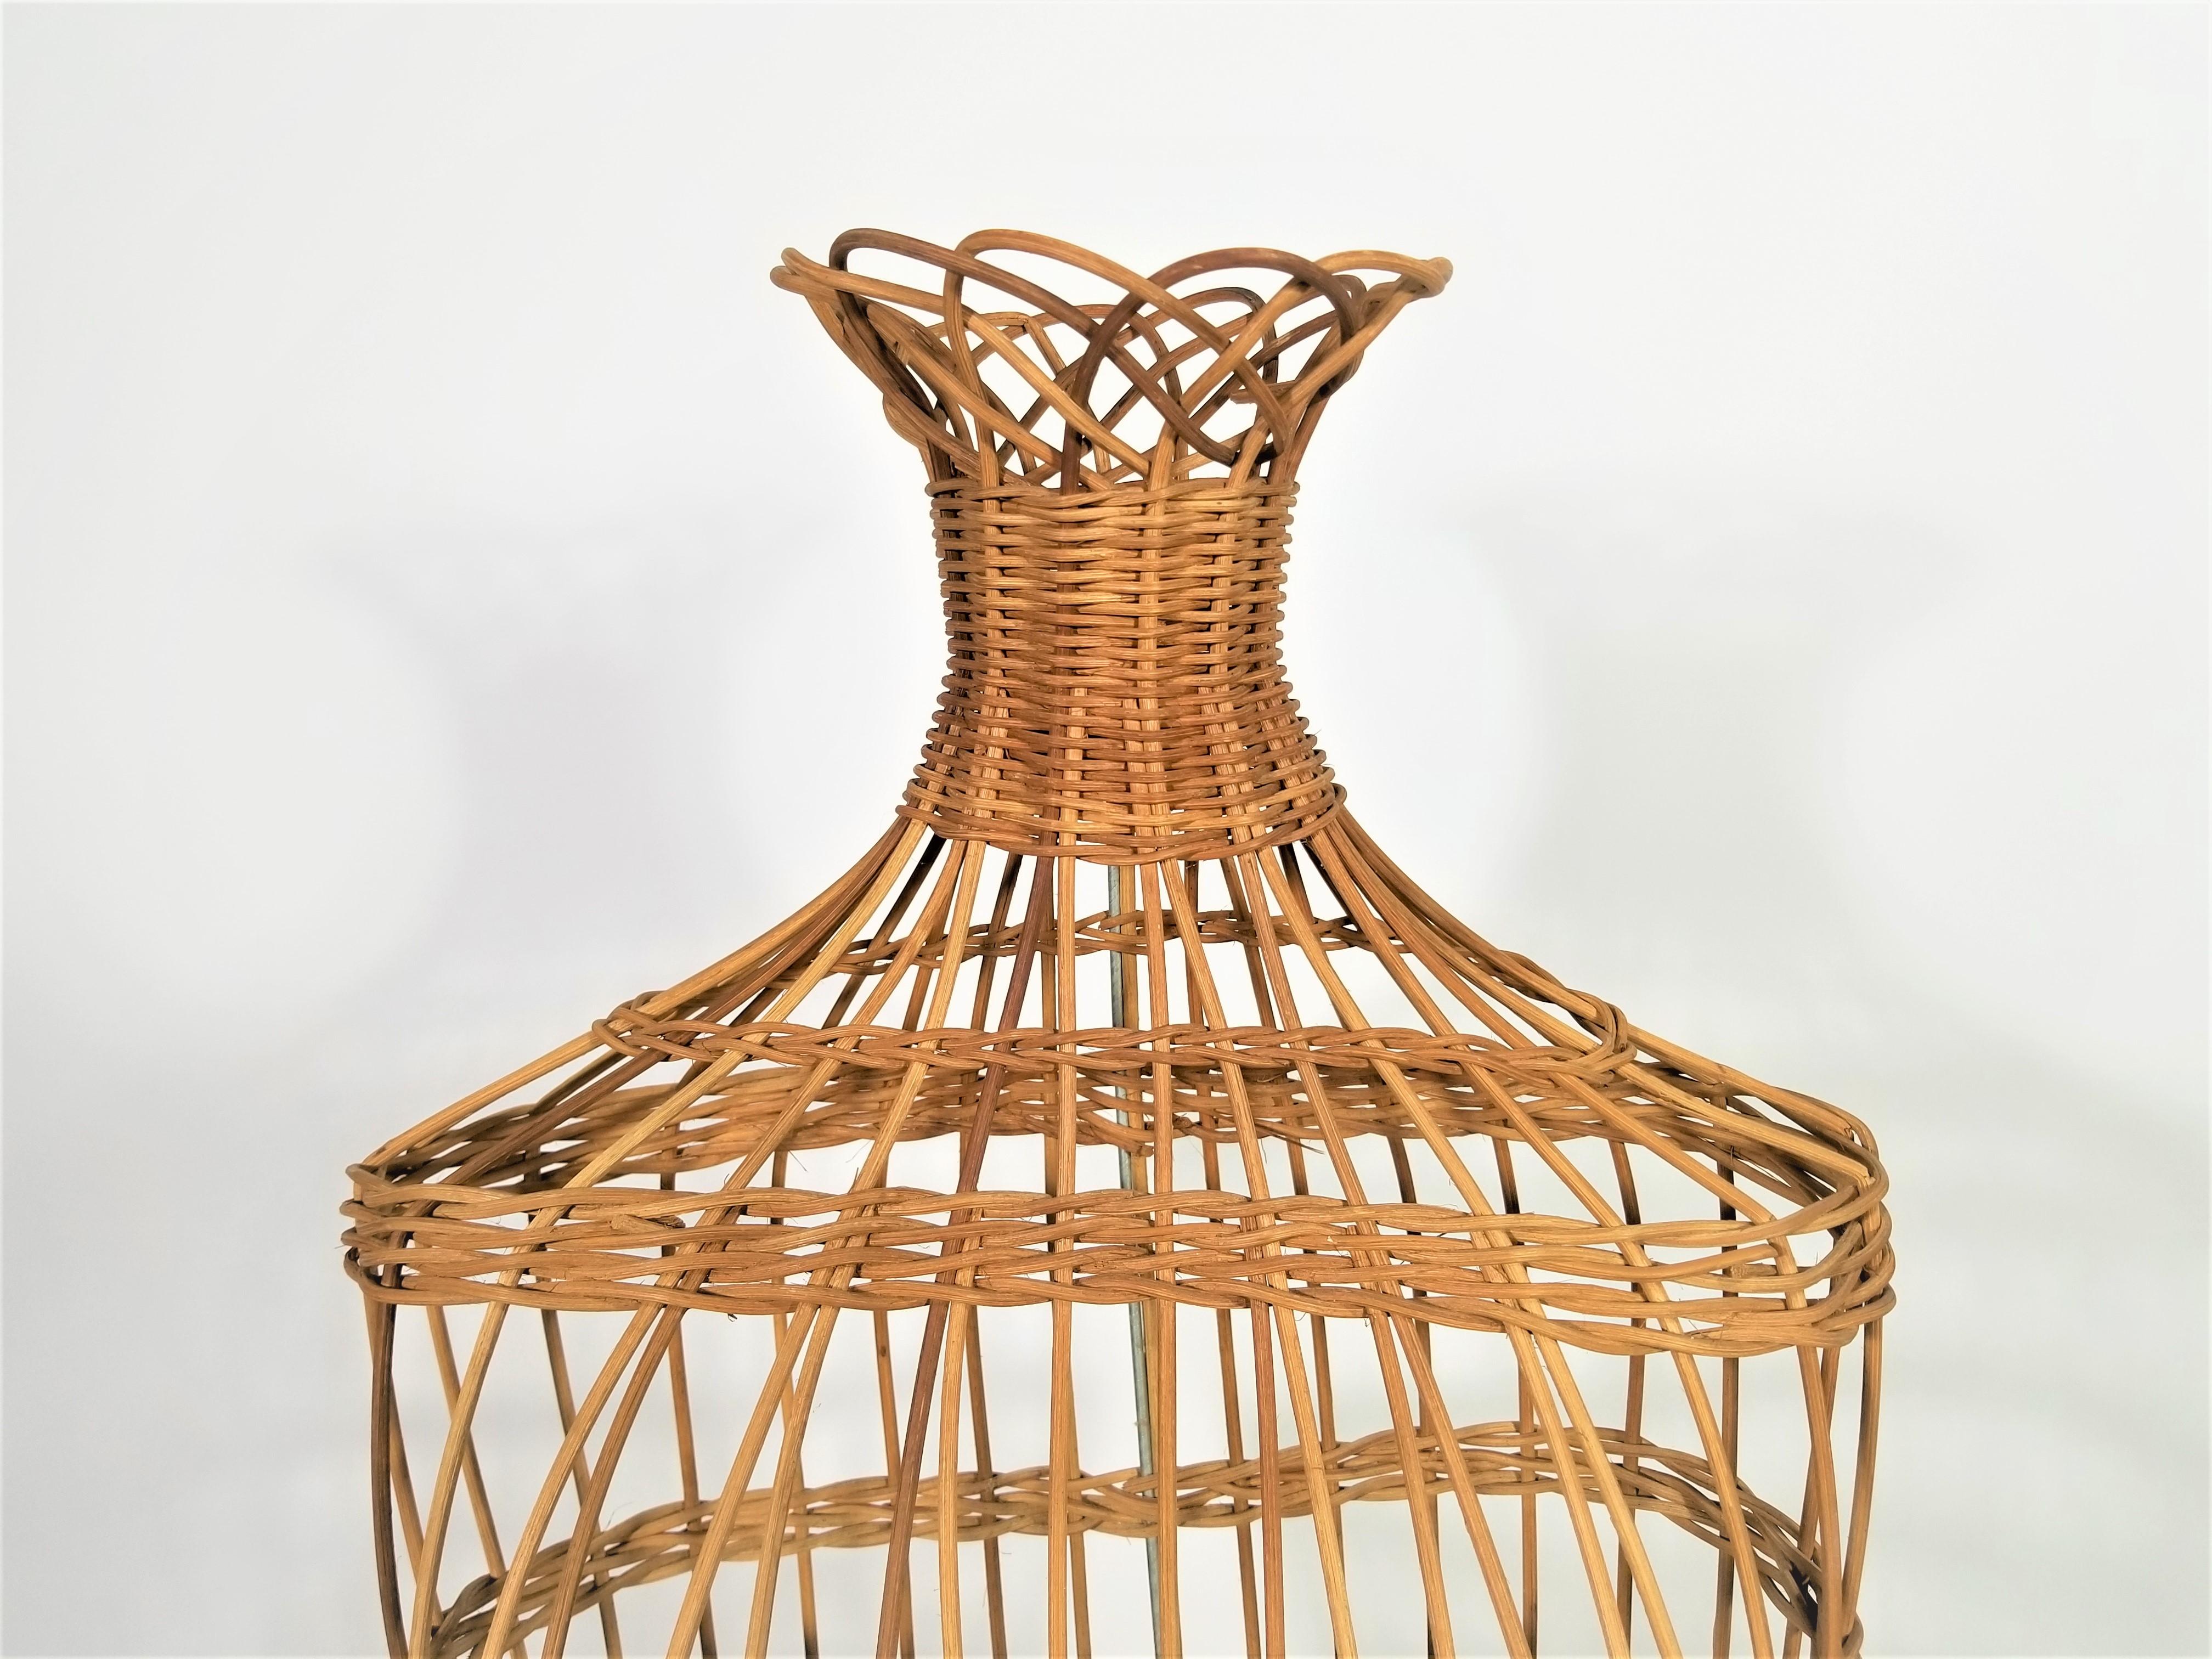 20th Century Wicker Rattan Figurative Mannequin or Dress Form 1950s 1960s